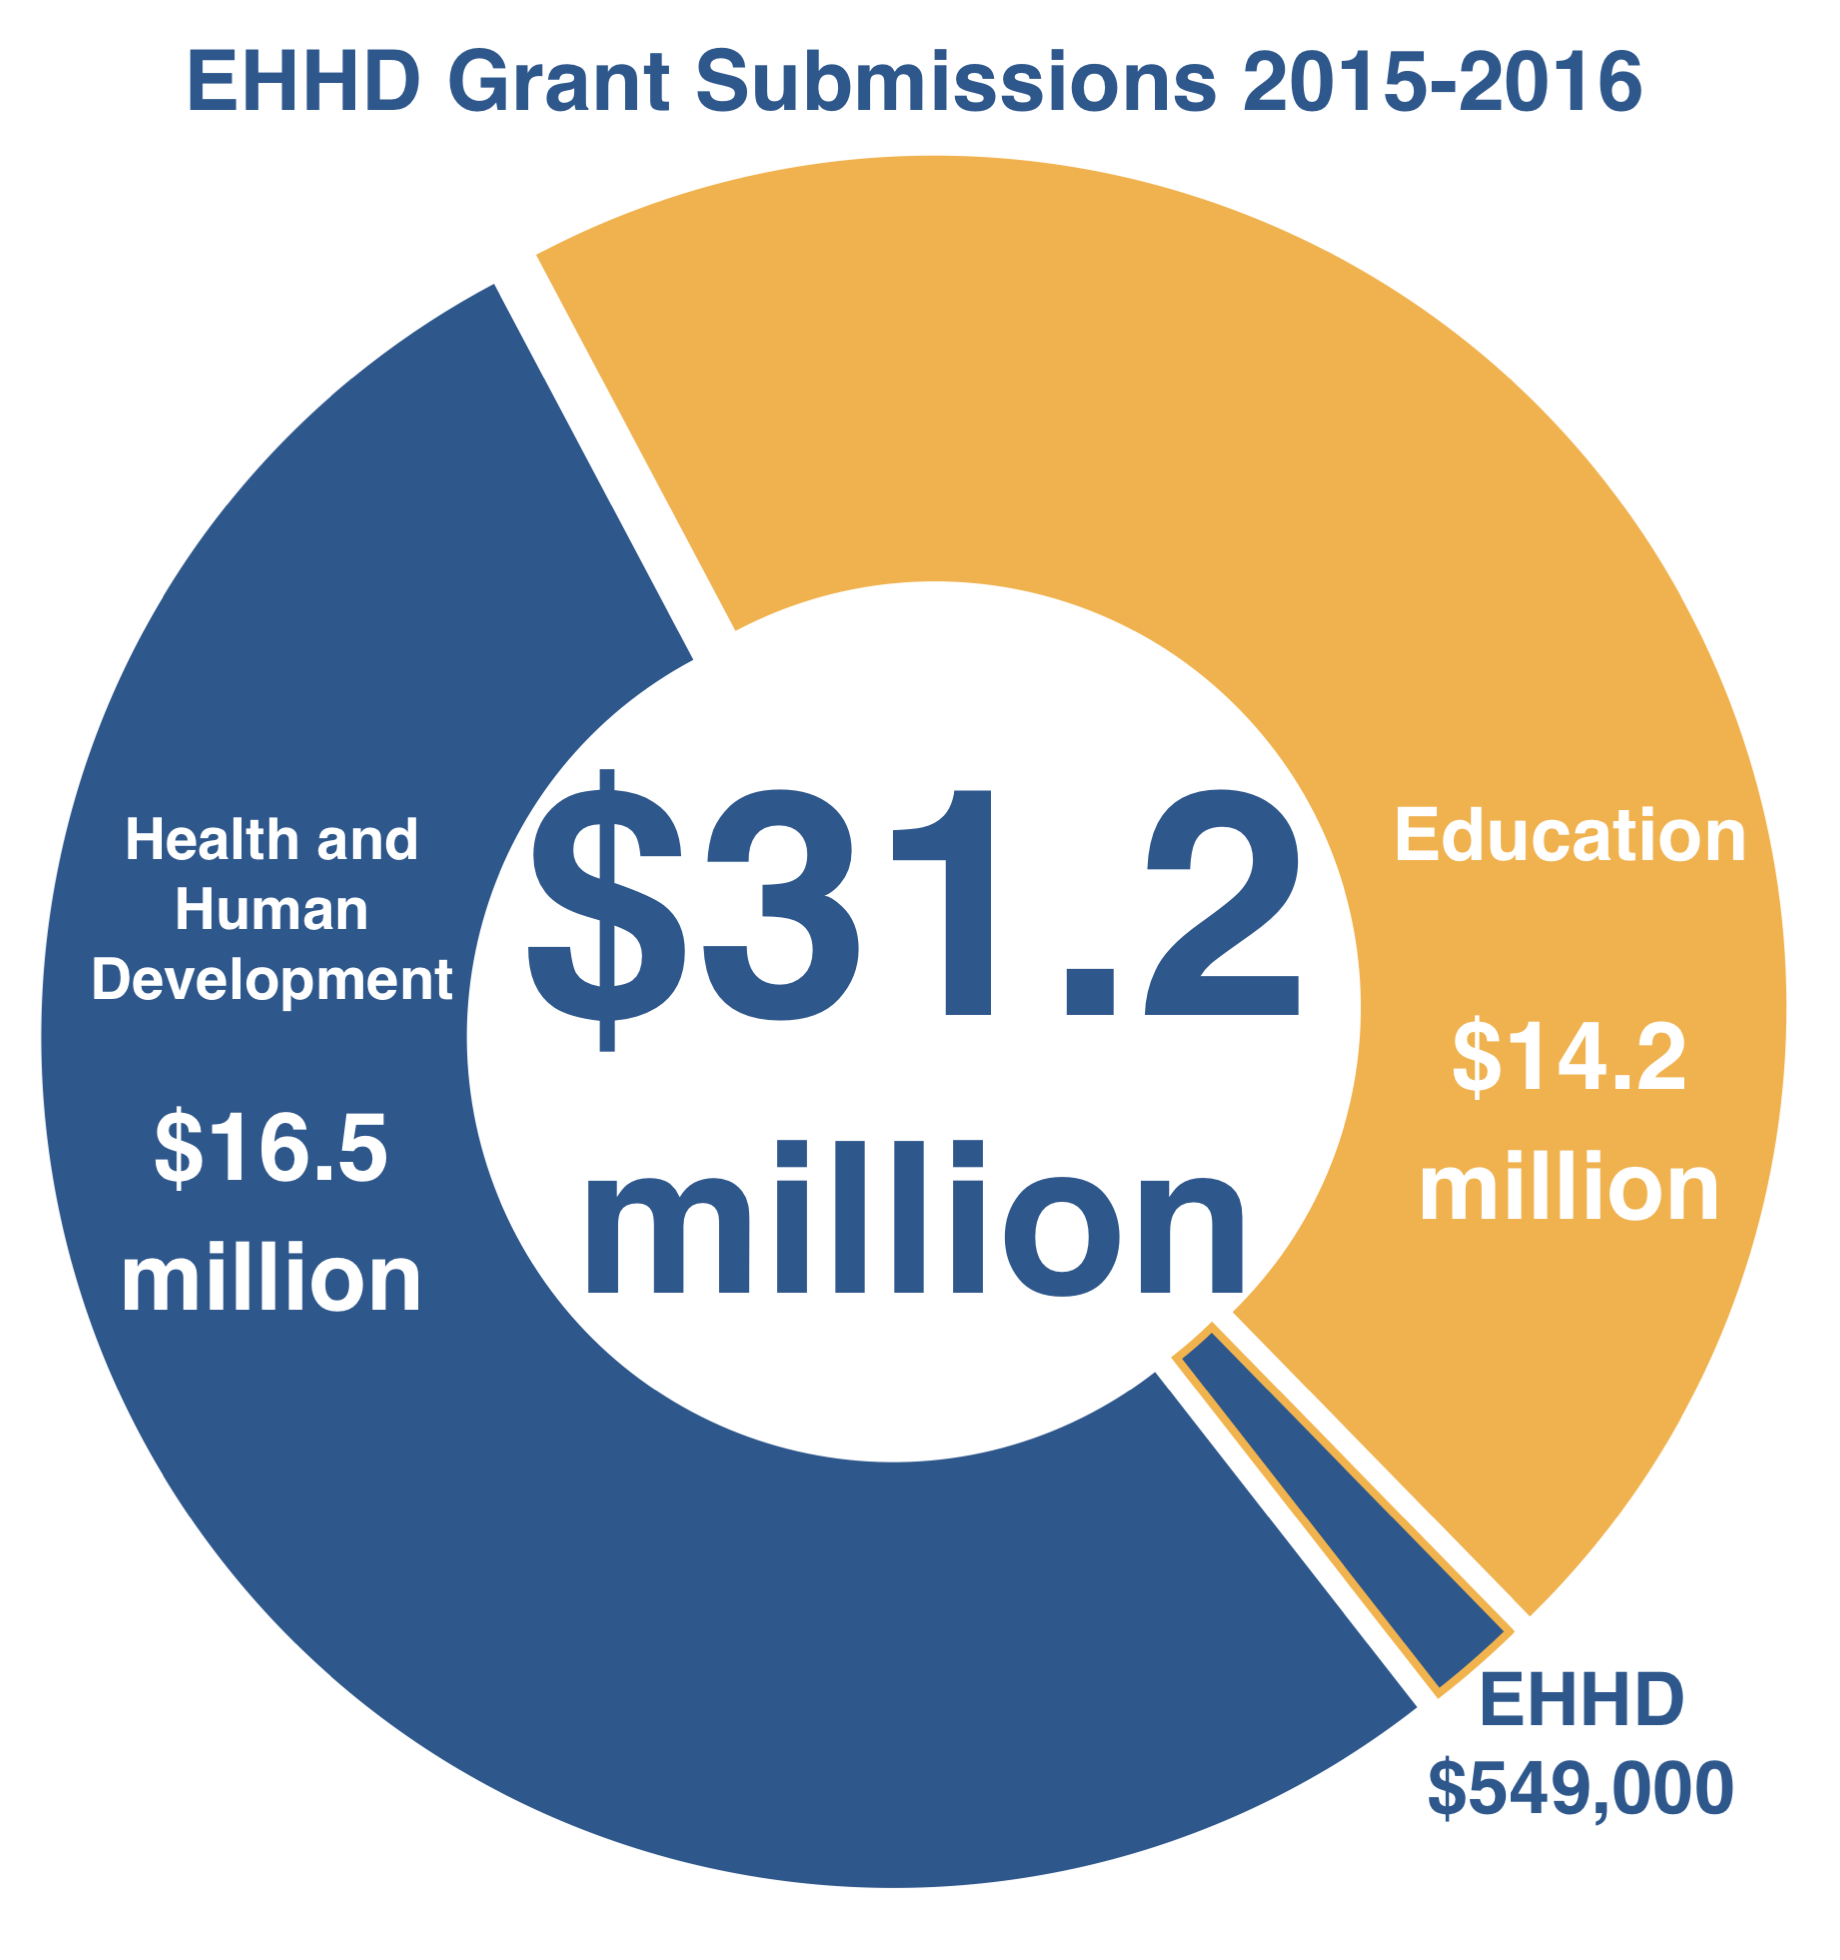 Donut chart depicting EHHD grant submissions by department for FY2016